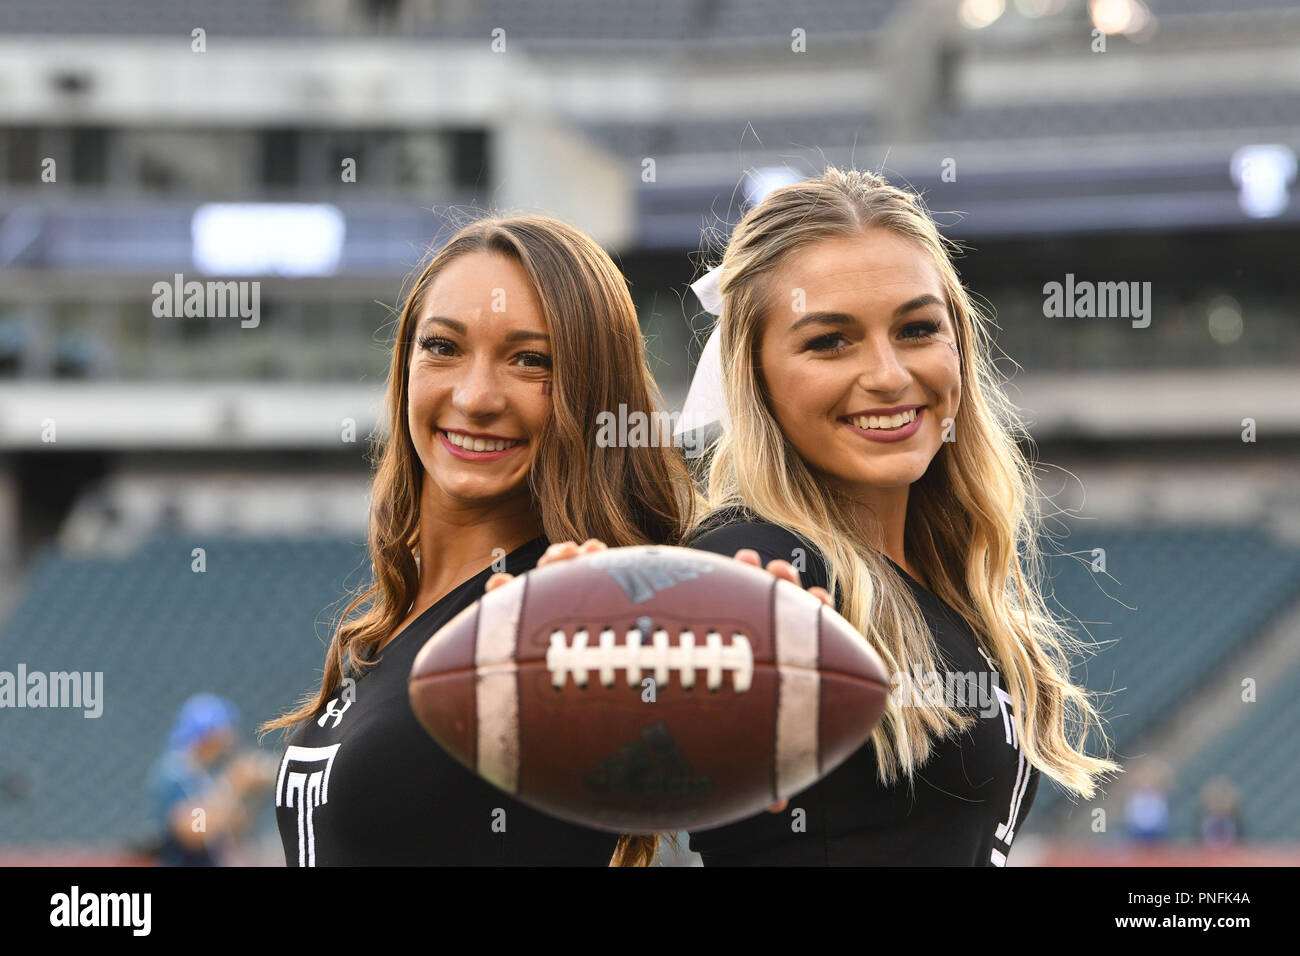 Philadelphia, Pennsylvania, USA. 20th Sep, 2018. Two Temple Owls cheerleaders pause for a photo prior the American Athletic Conference football game played at Lincoln Financial Field in Philadelphia. Temple beat Tulsa 31-17. Credit: Ken Inness/ZUMA Wire/Alamy Live News Stock Photo